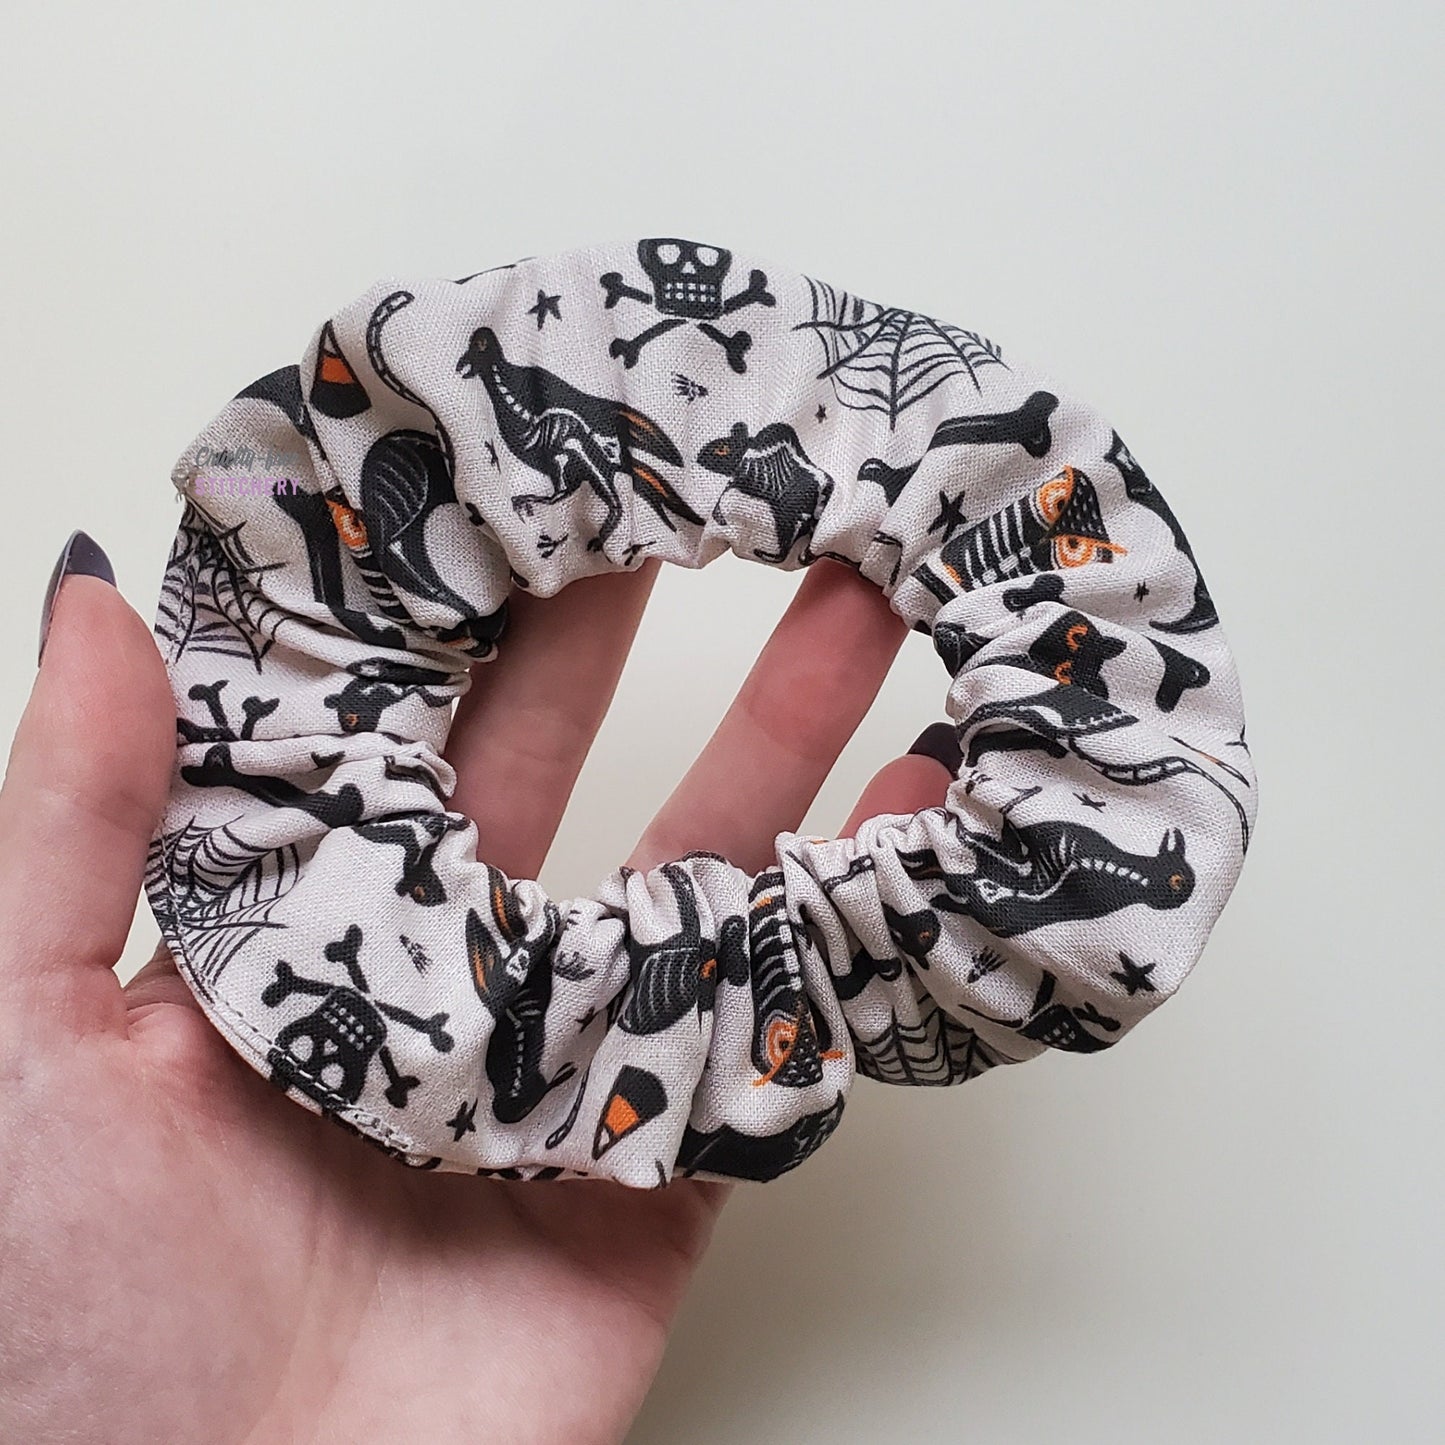 Halloween x-ray scrunchie in my hand for size reference. It covers my fingers and half of my palm.